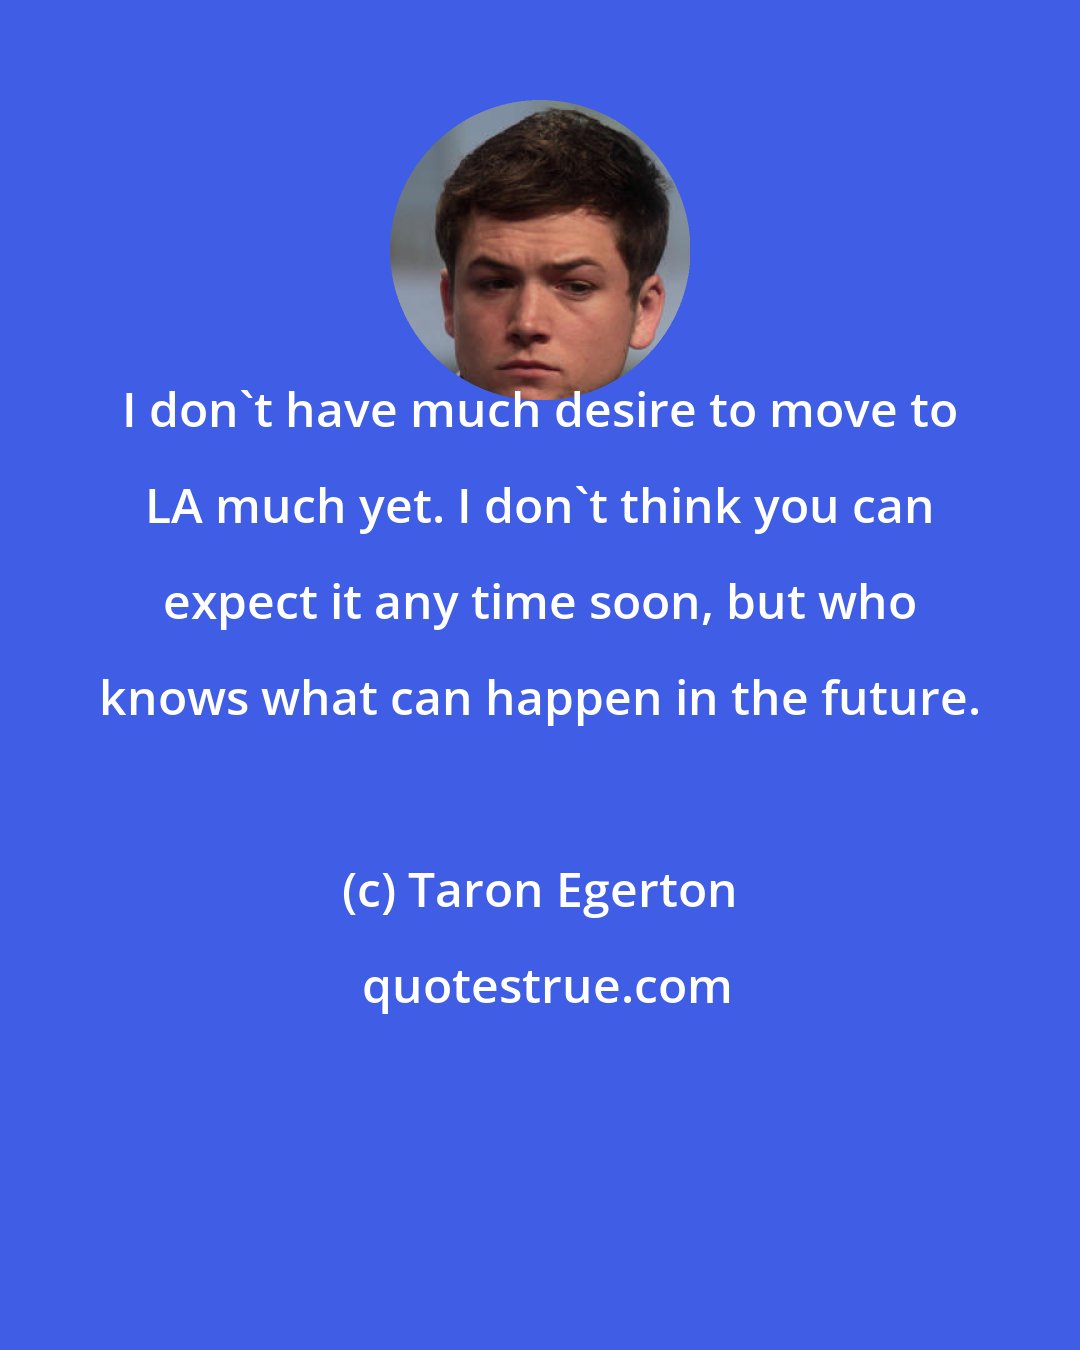 Taron Egerton: I don't have much desire to move to LA much yet. I don't think you can expect it any time soon, but who knows what can happen in the future.